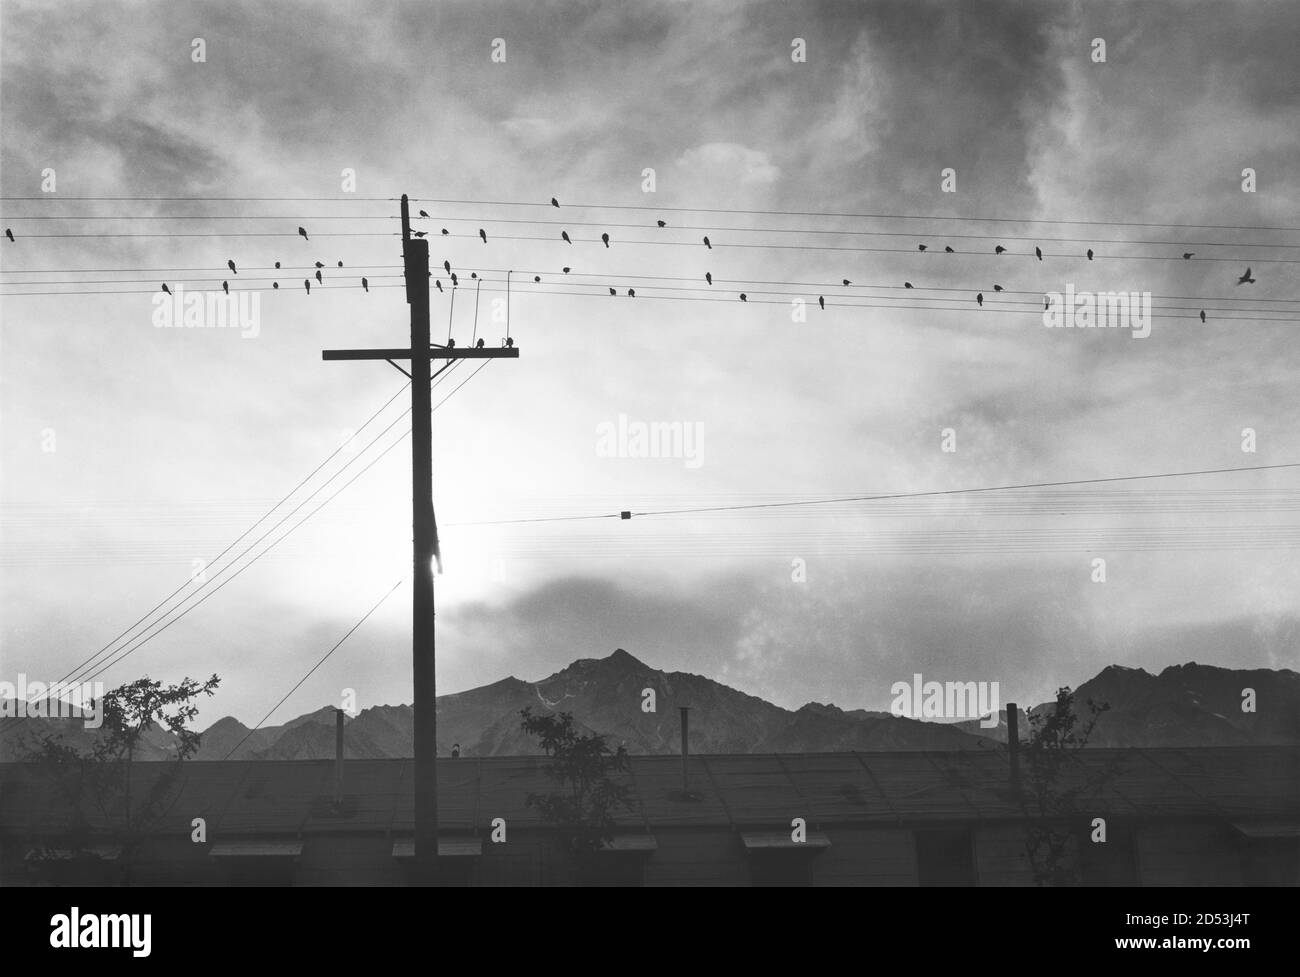 Birds on Wires at Sunset with Mountains in Background, Manzanar Relocation Center, Manzanar, California, USA, Ansel Adams, Manzanar War Relocation Center photographs, 1943 Stock Photo